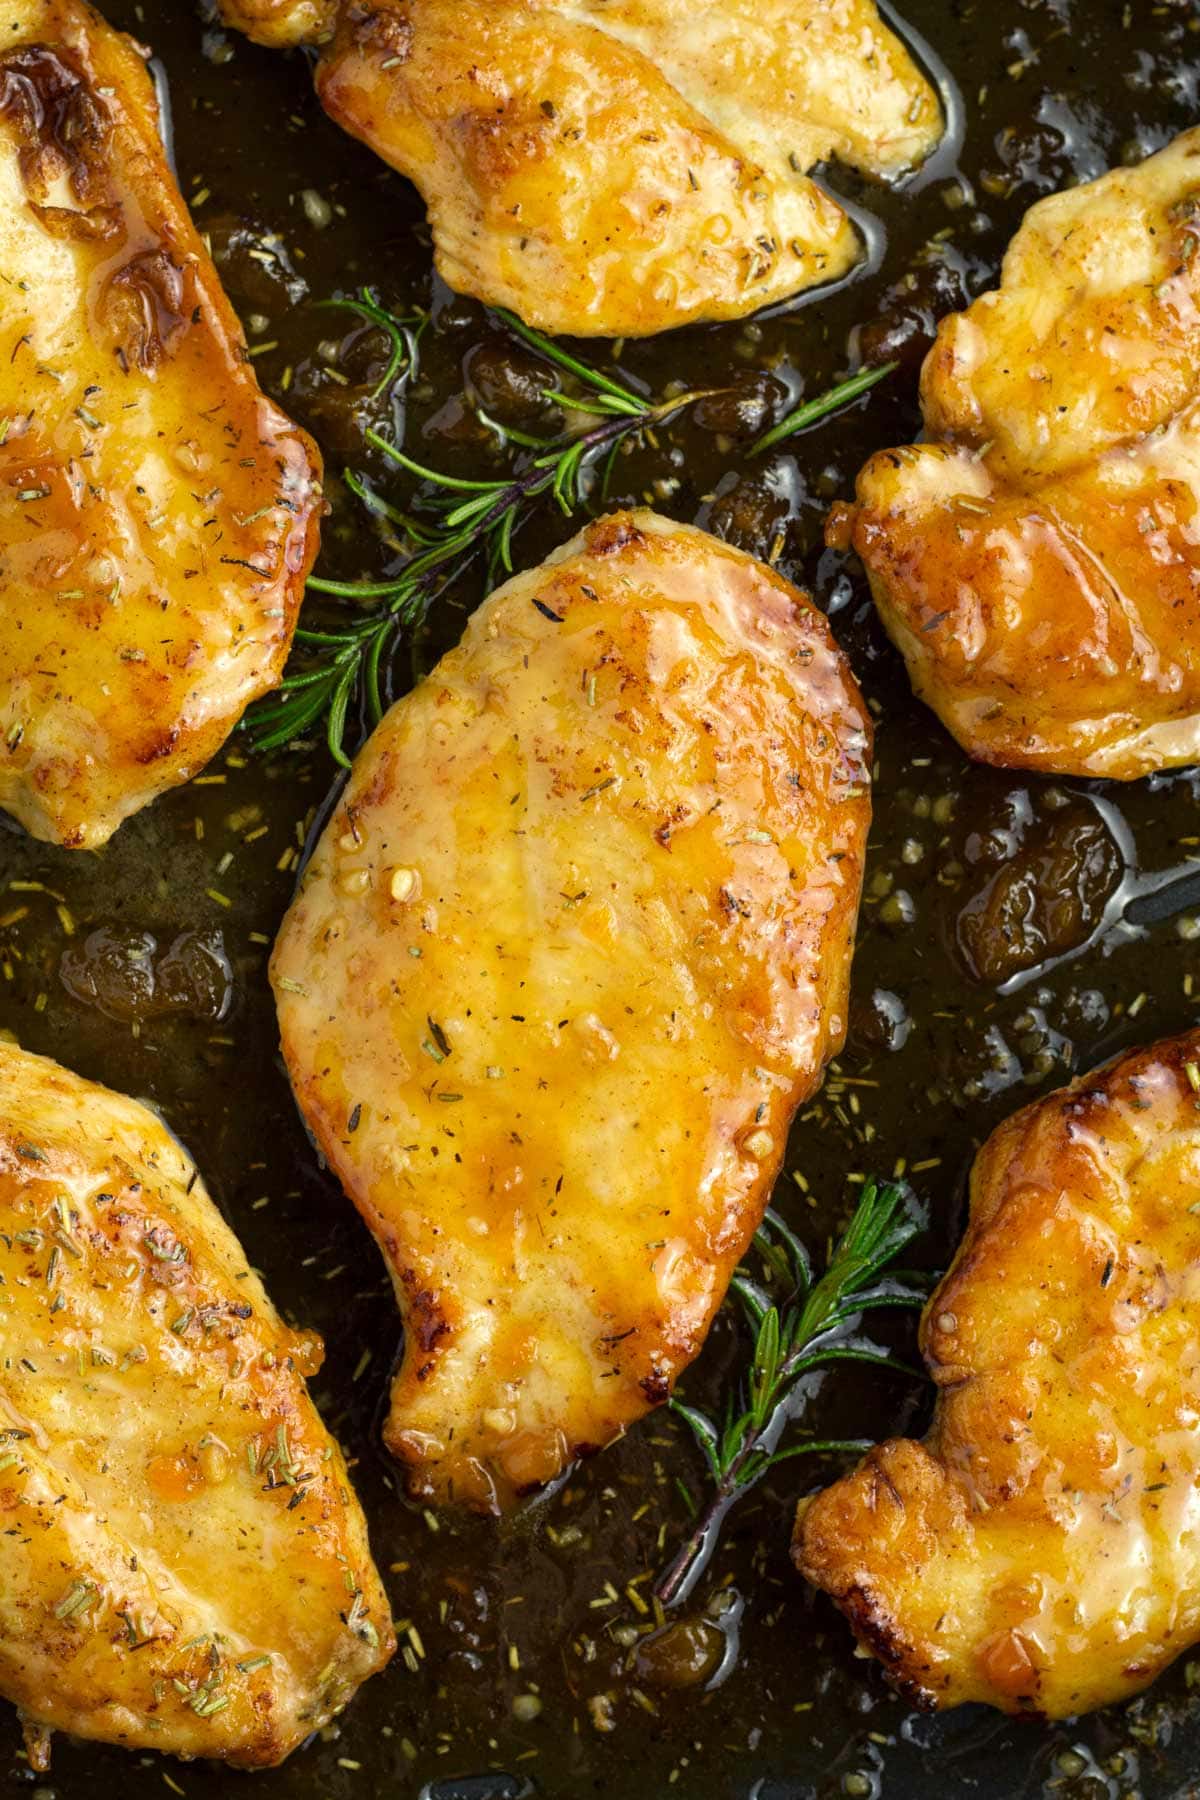 Overhead view of six chicken breasts in a black skillet covered in apricot jam sauce.